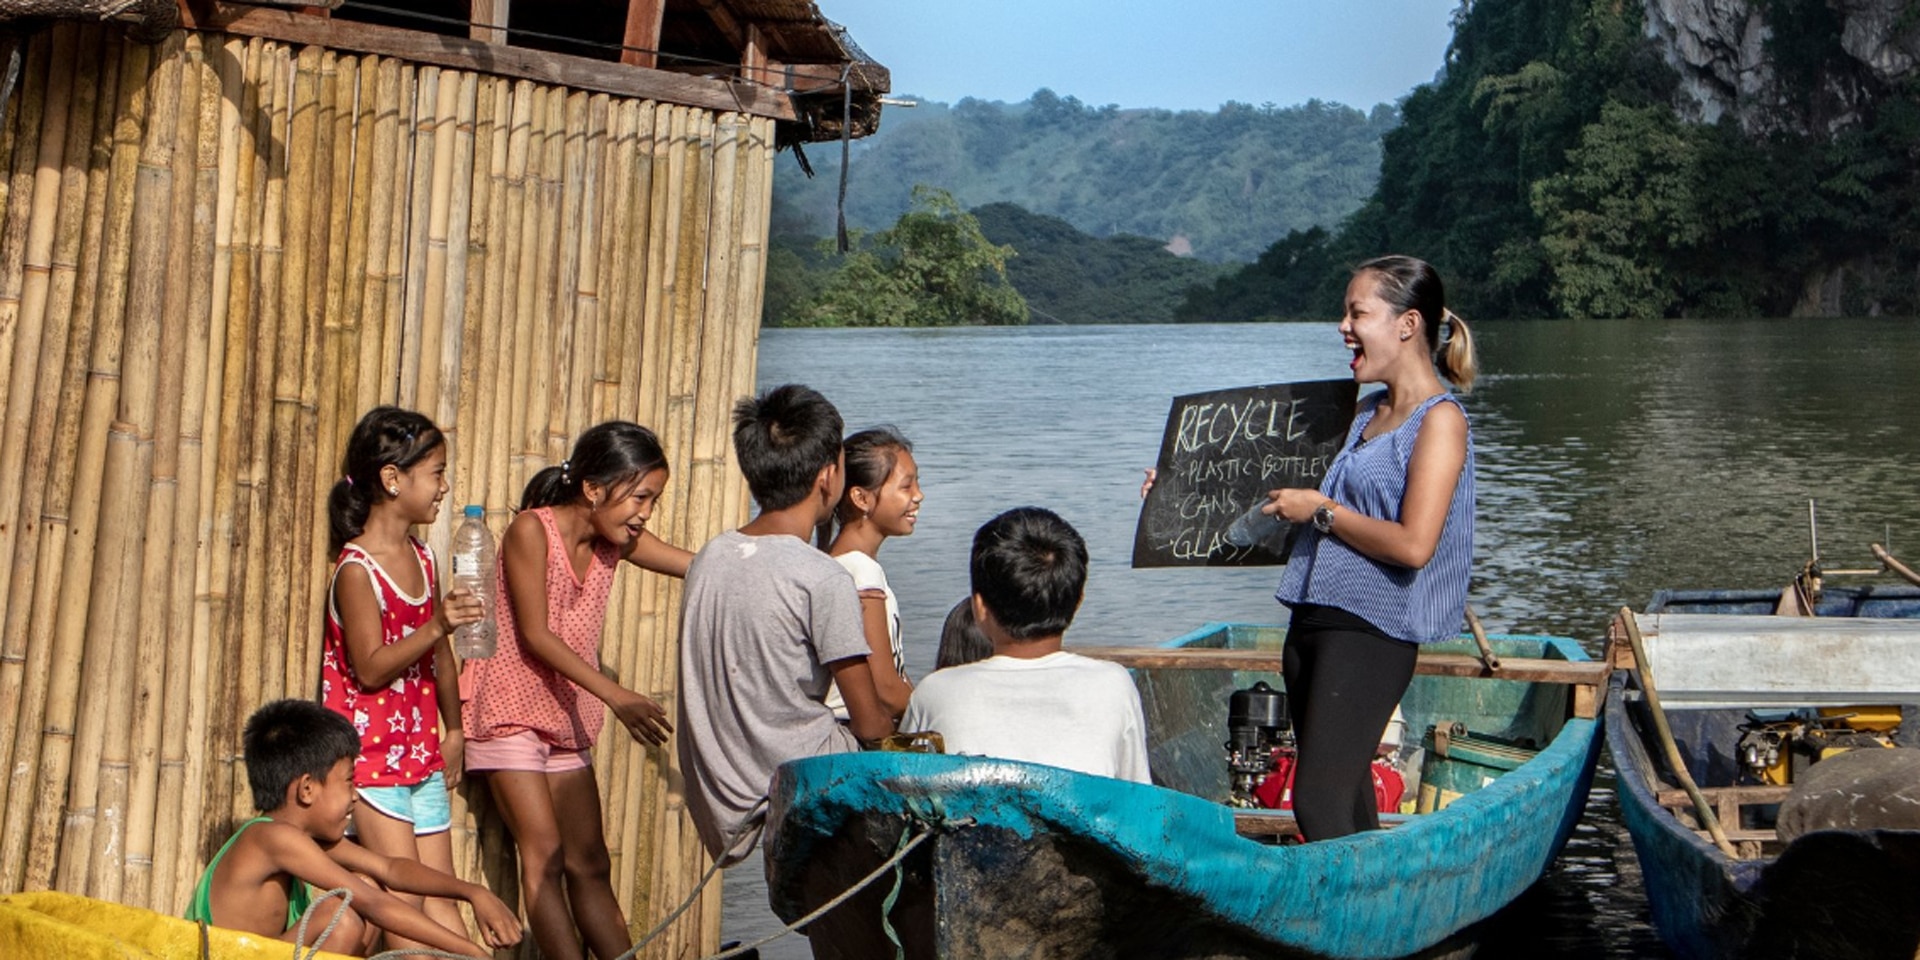 A young woman teaches children from a boat on a river in the Philippines.